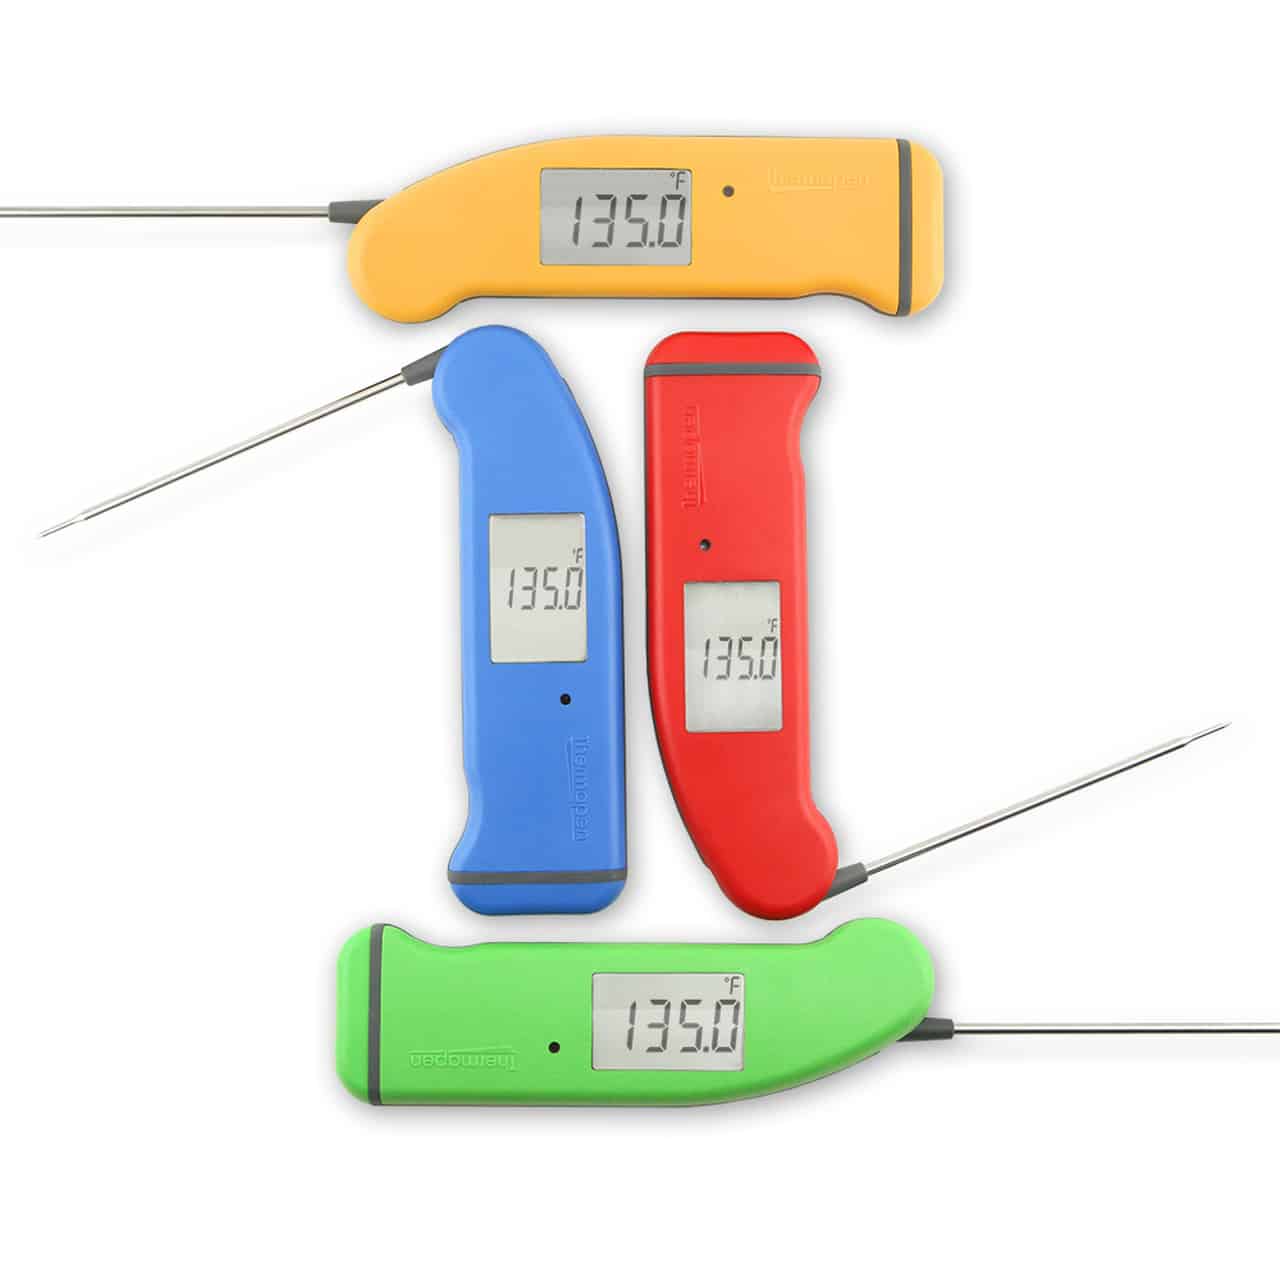 Four different colored digital thermometers, perfect for grilling gifts, on a white background.